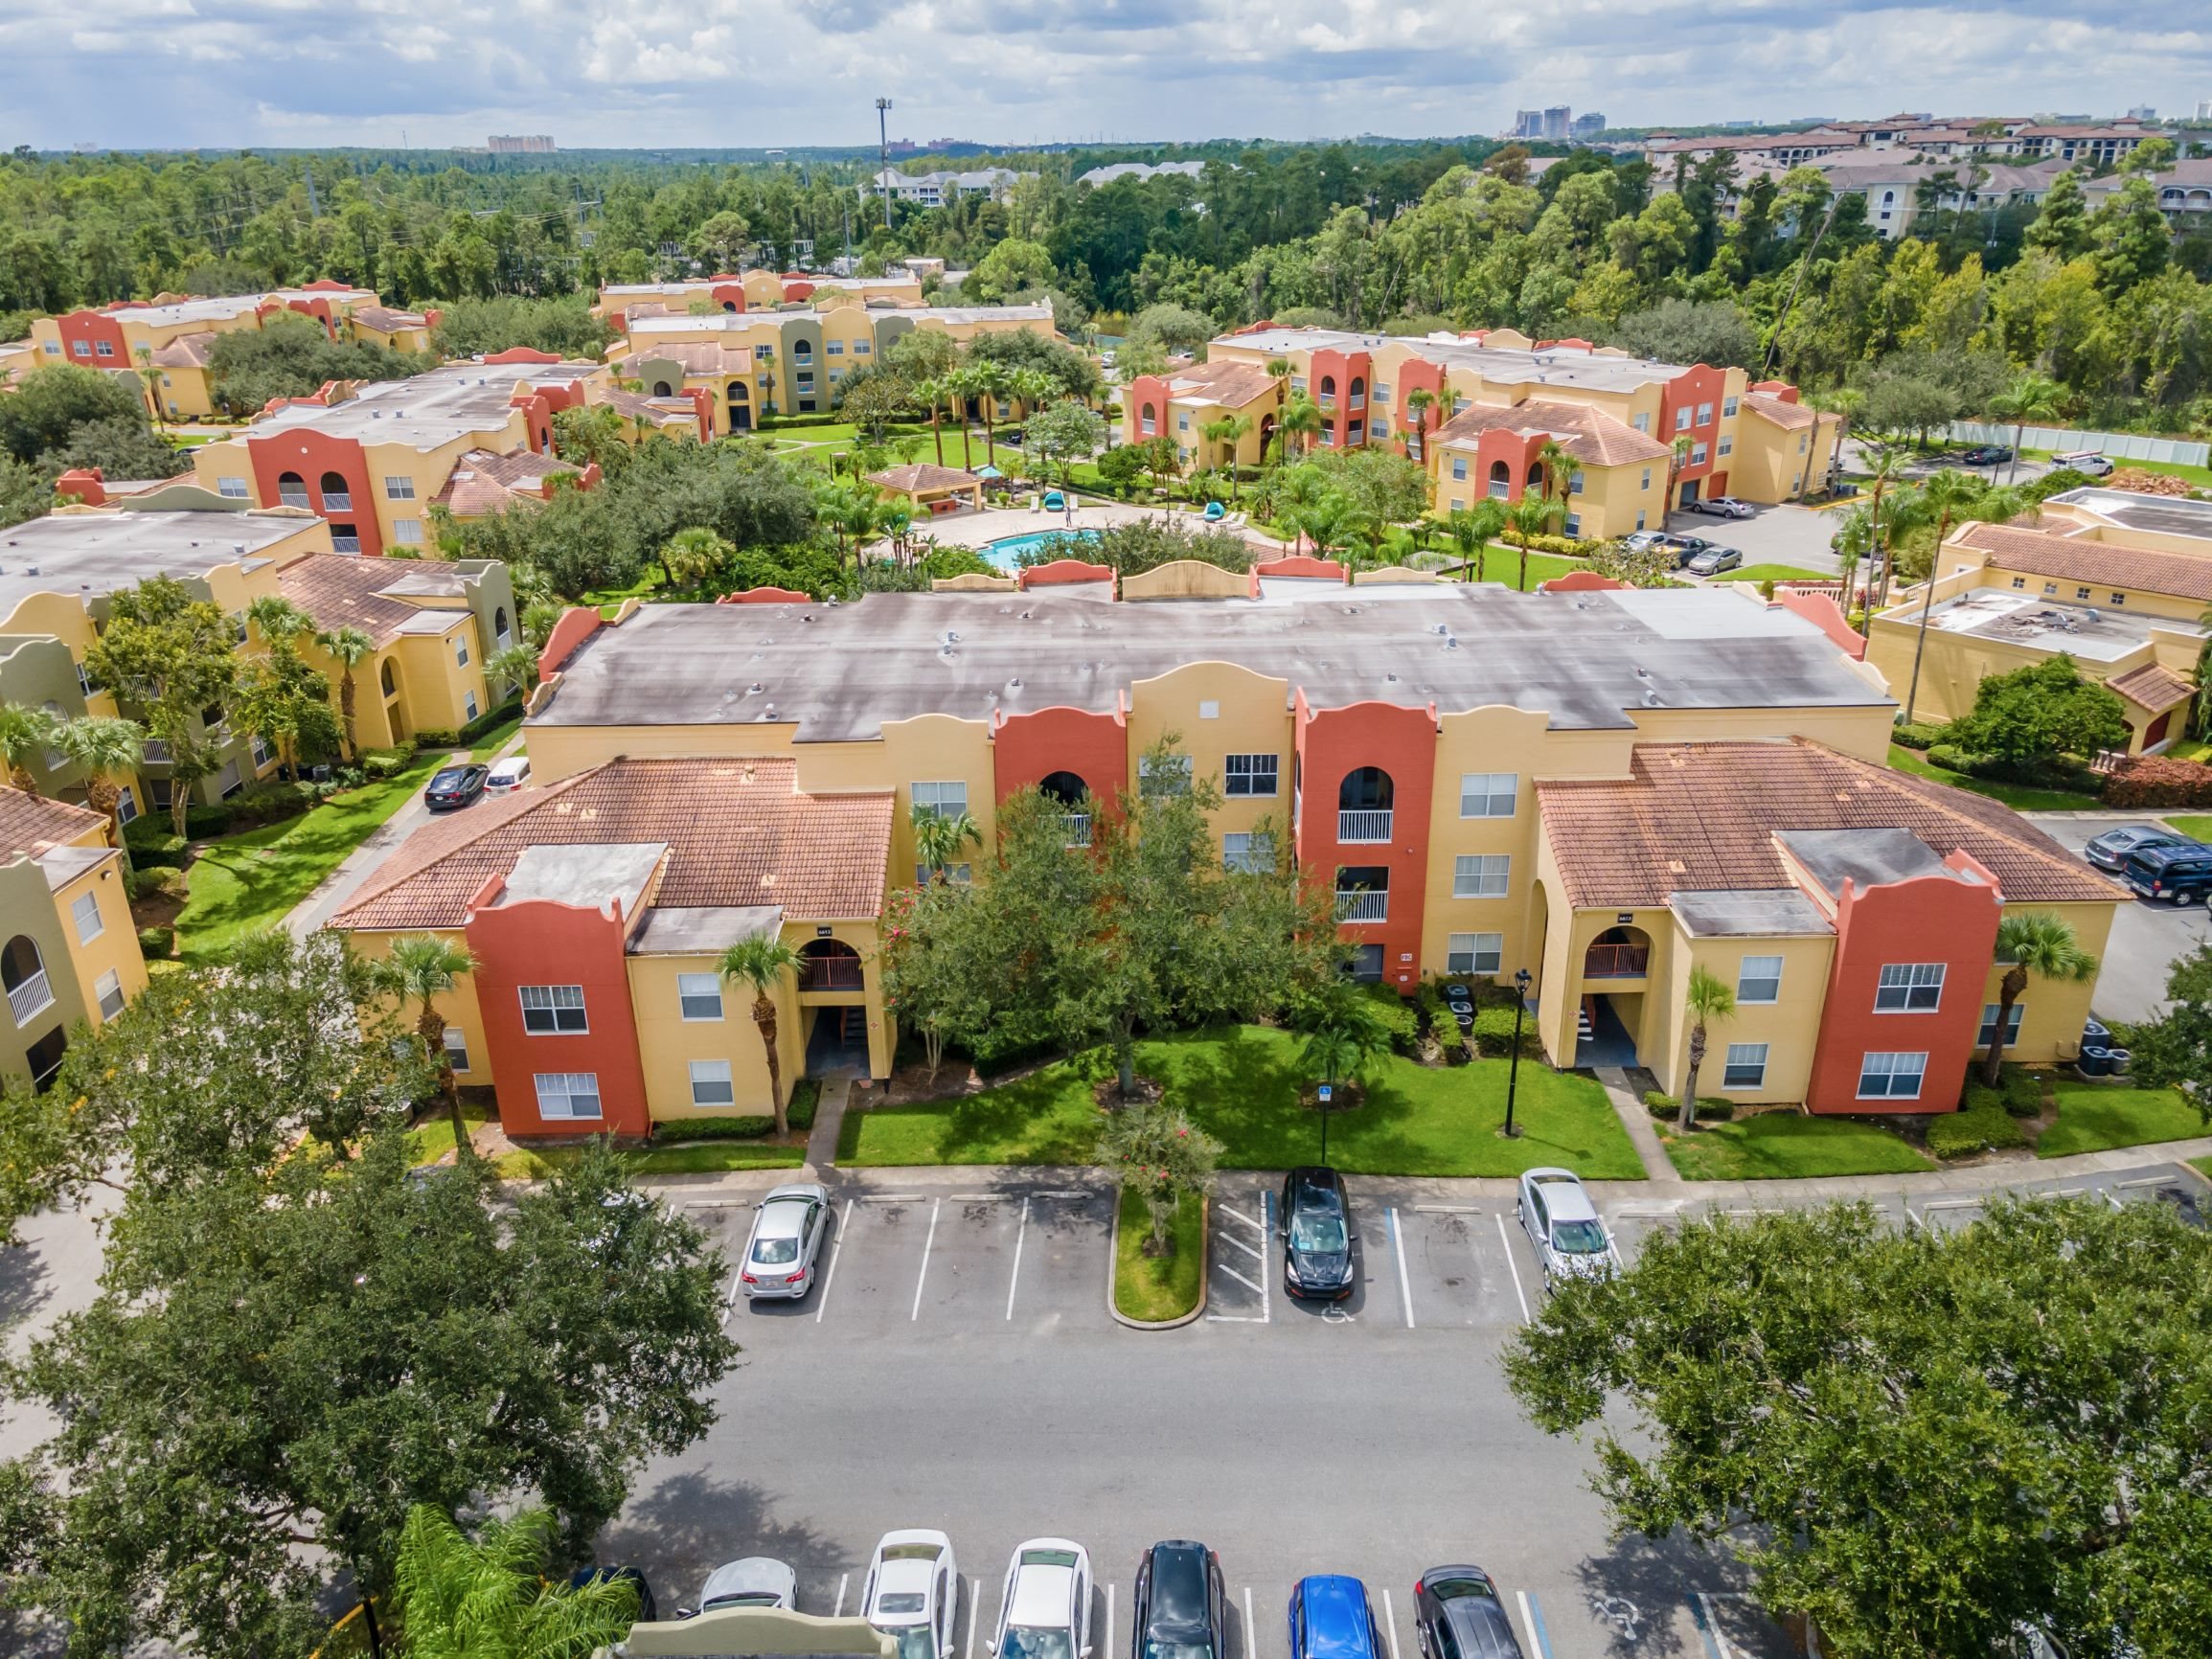 Photos And Video Of Mission Club Apartments In Orlando